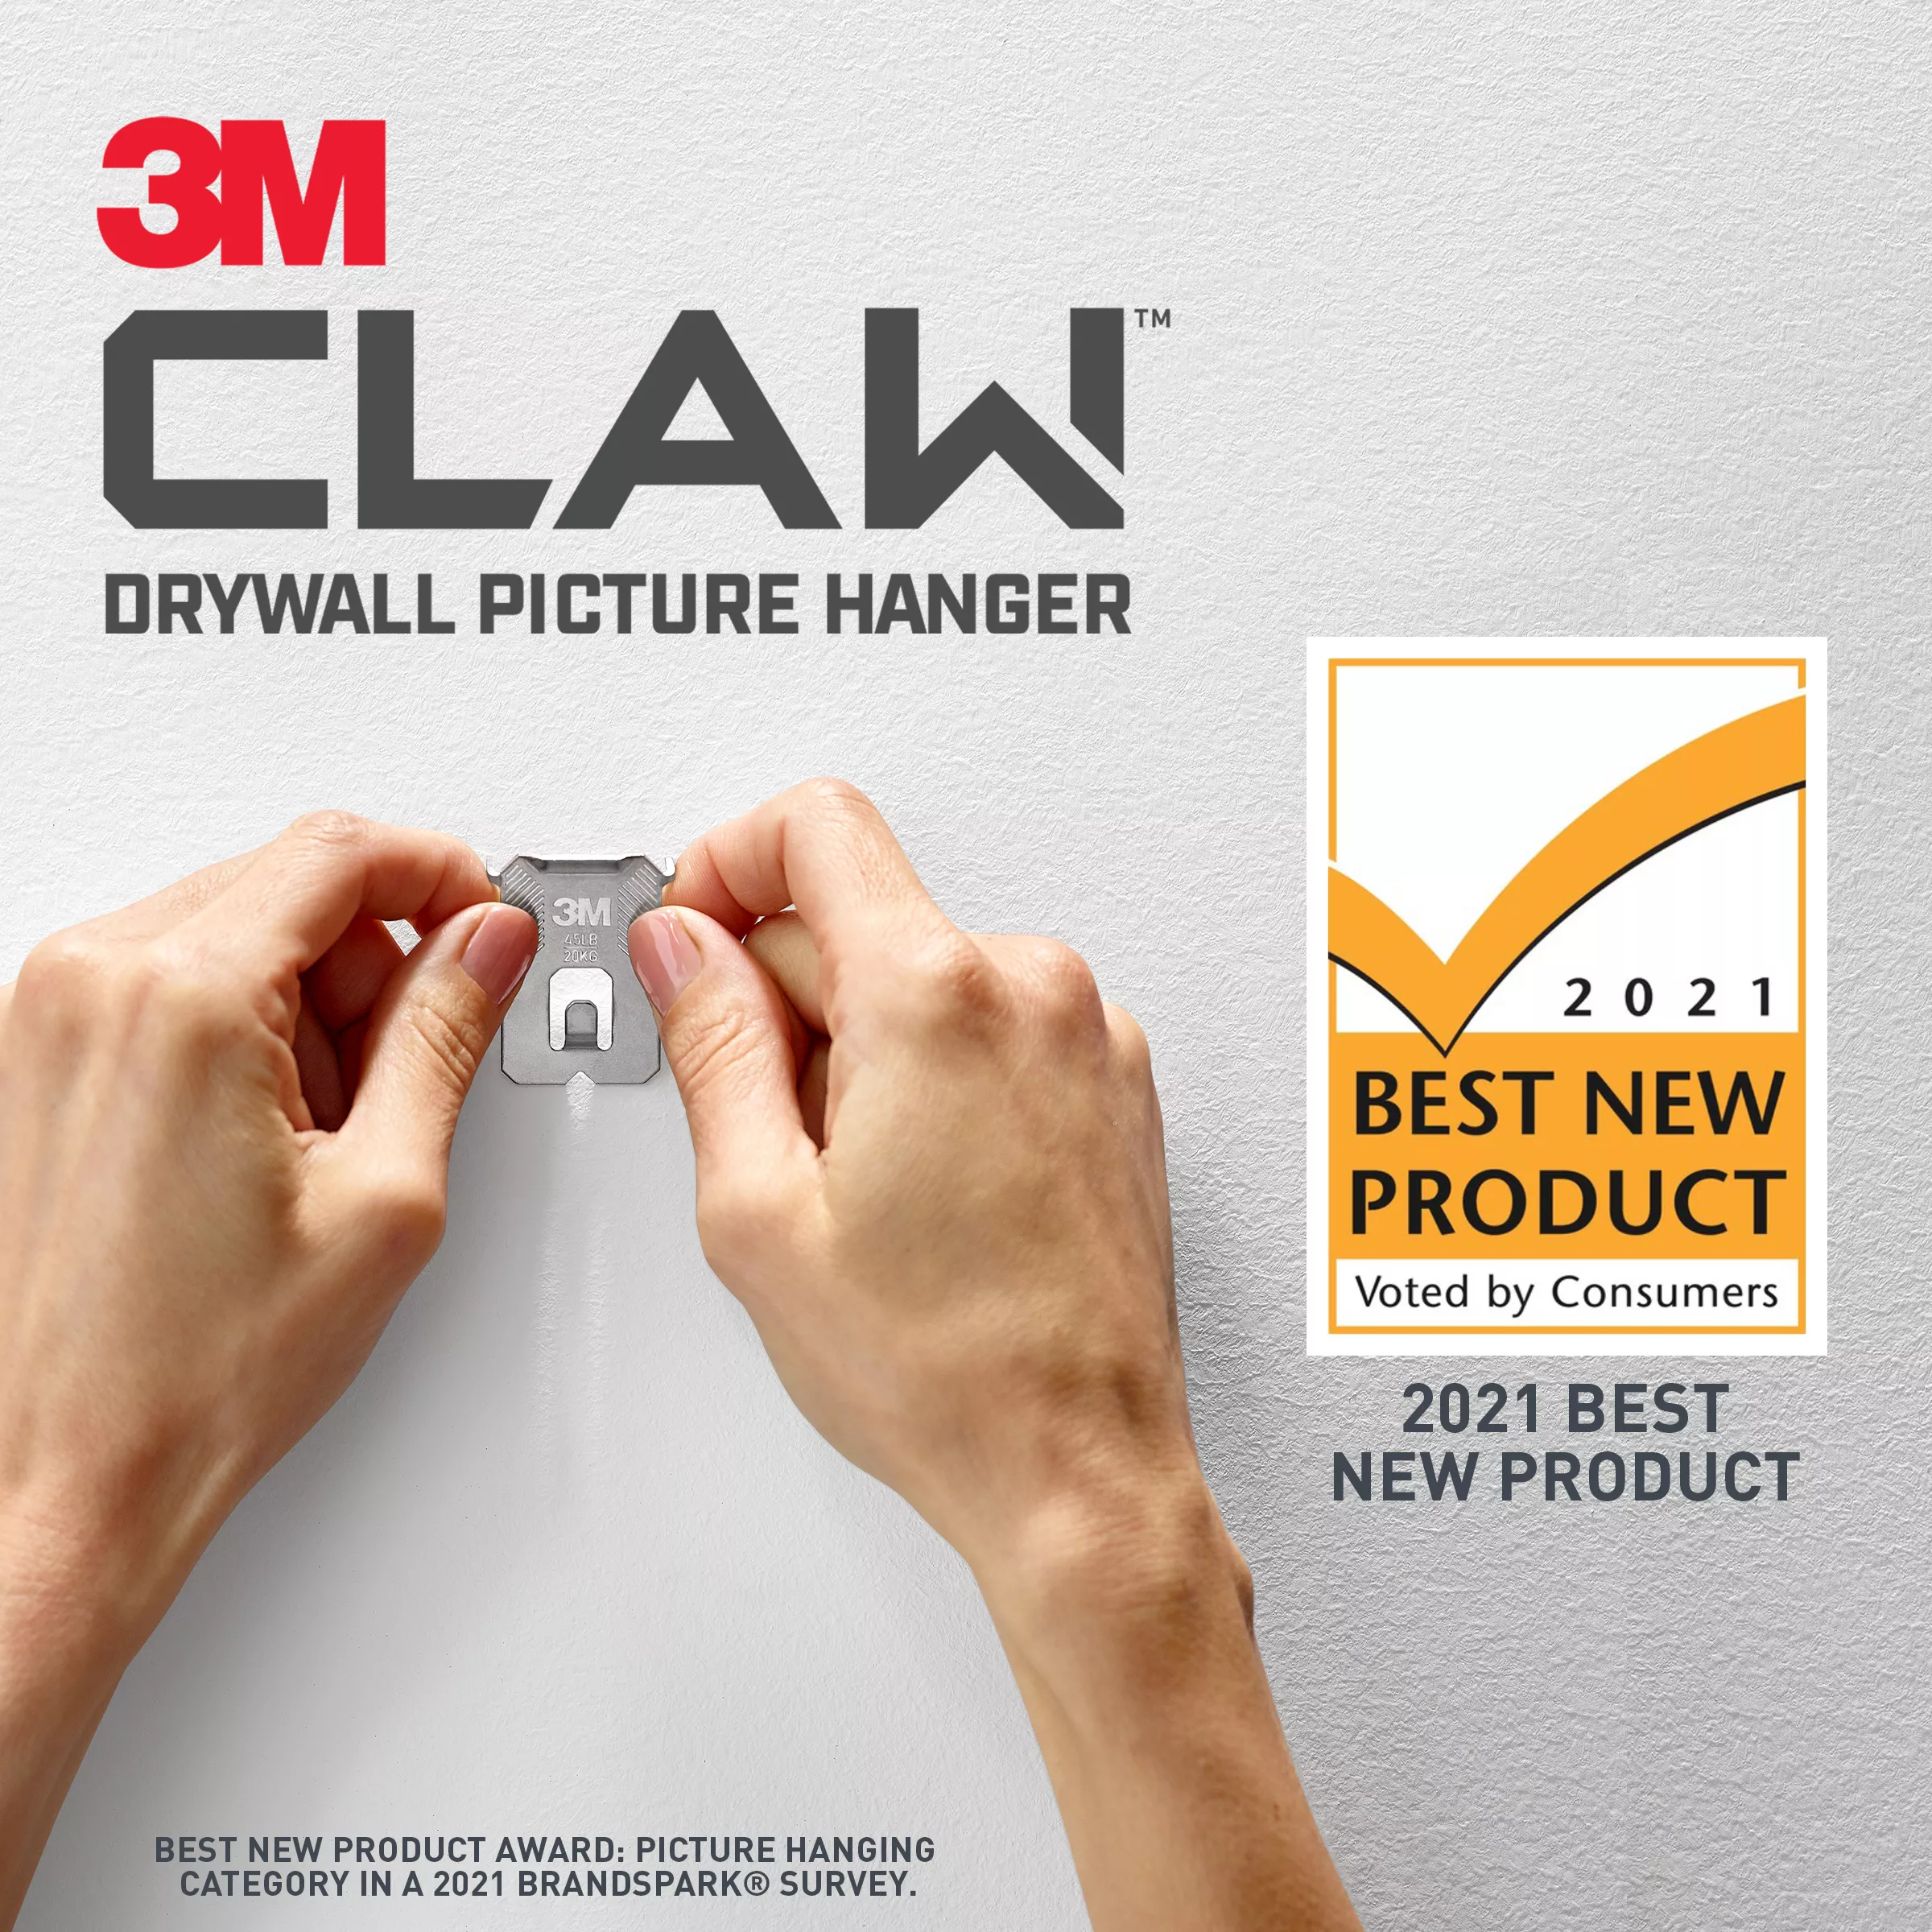 SKU 7100227272 | 3M CLAW™ Drywall Picture Hanger 45 lb with Temporary Spot Marker 3PH45M-1EF